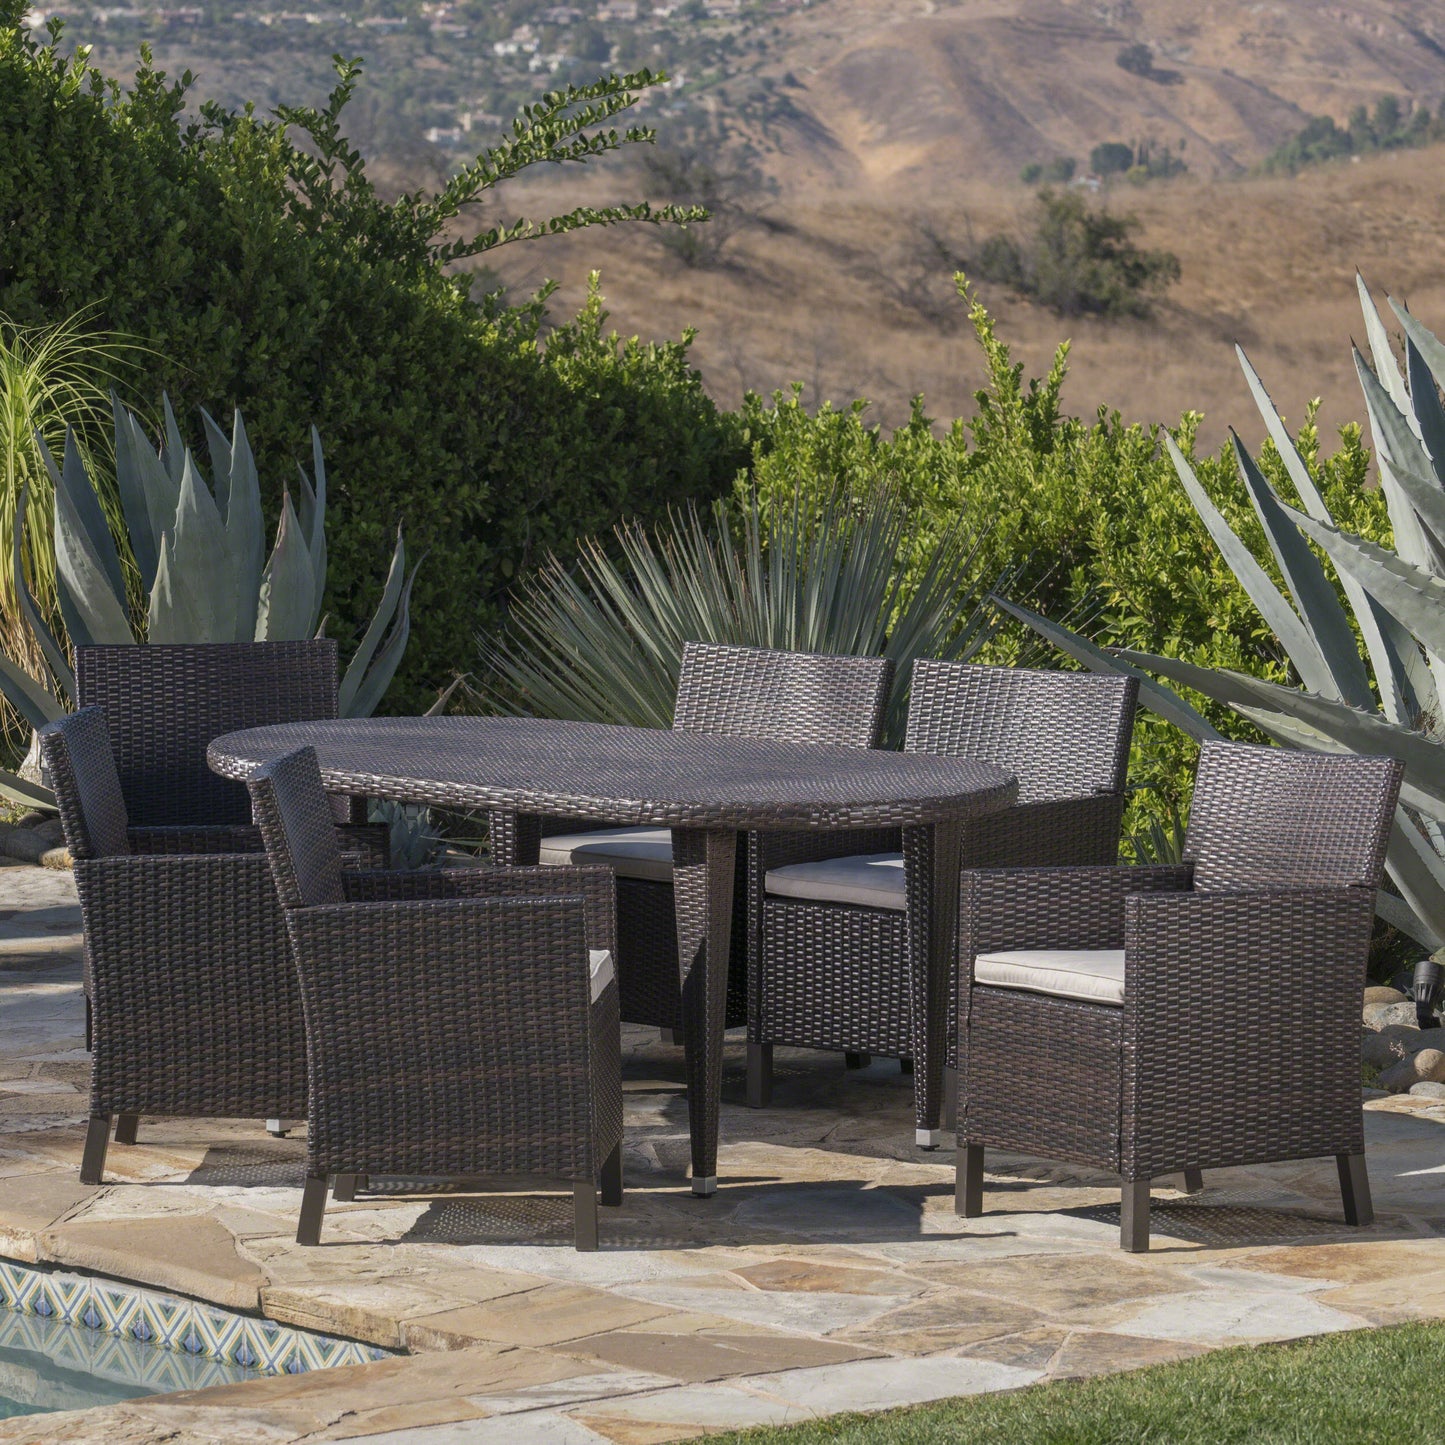 Crete Outdoor 7 Piece Wicker Oval Dining Set with Water Resistant Cushions